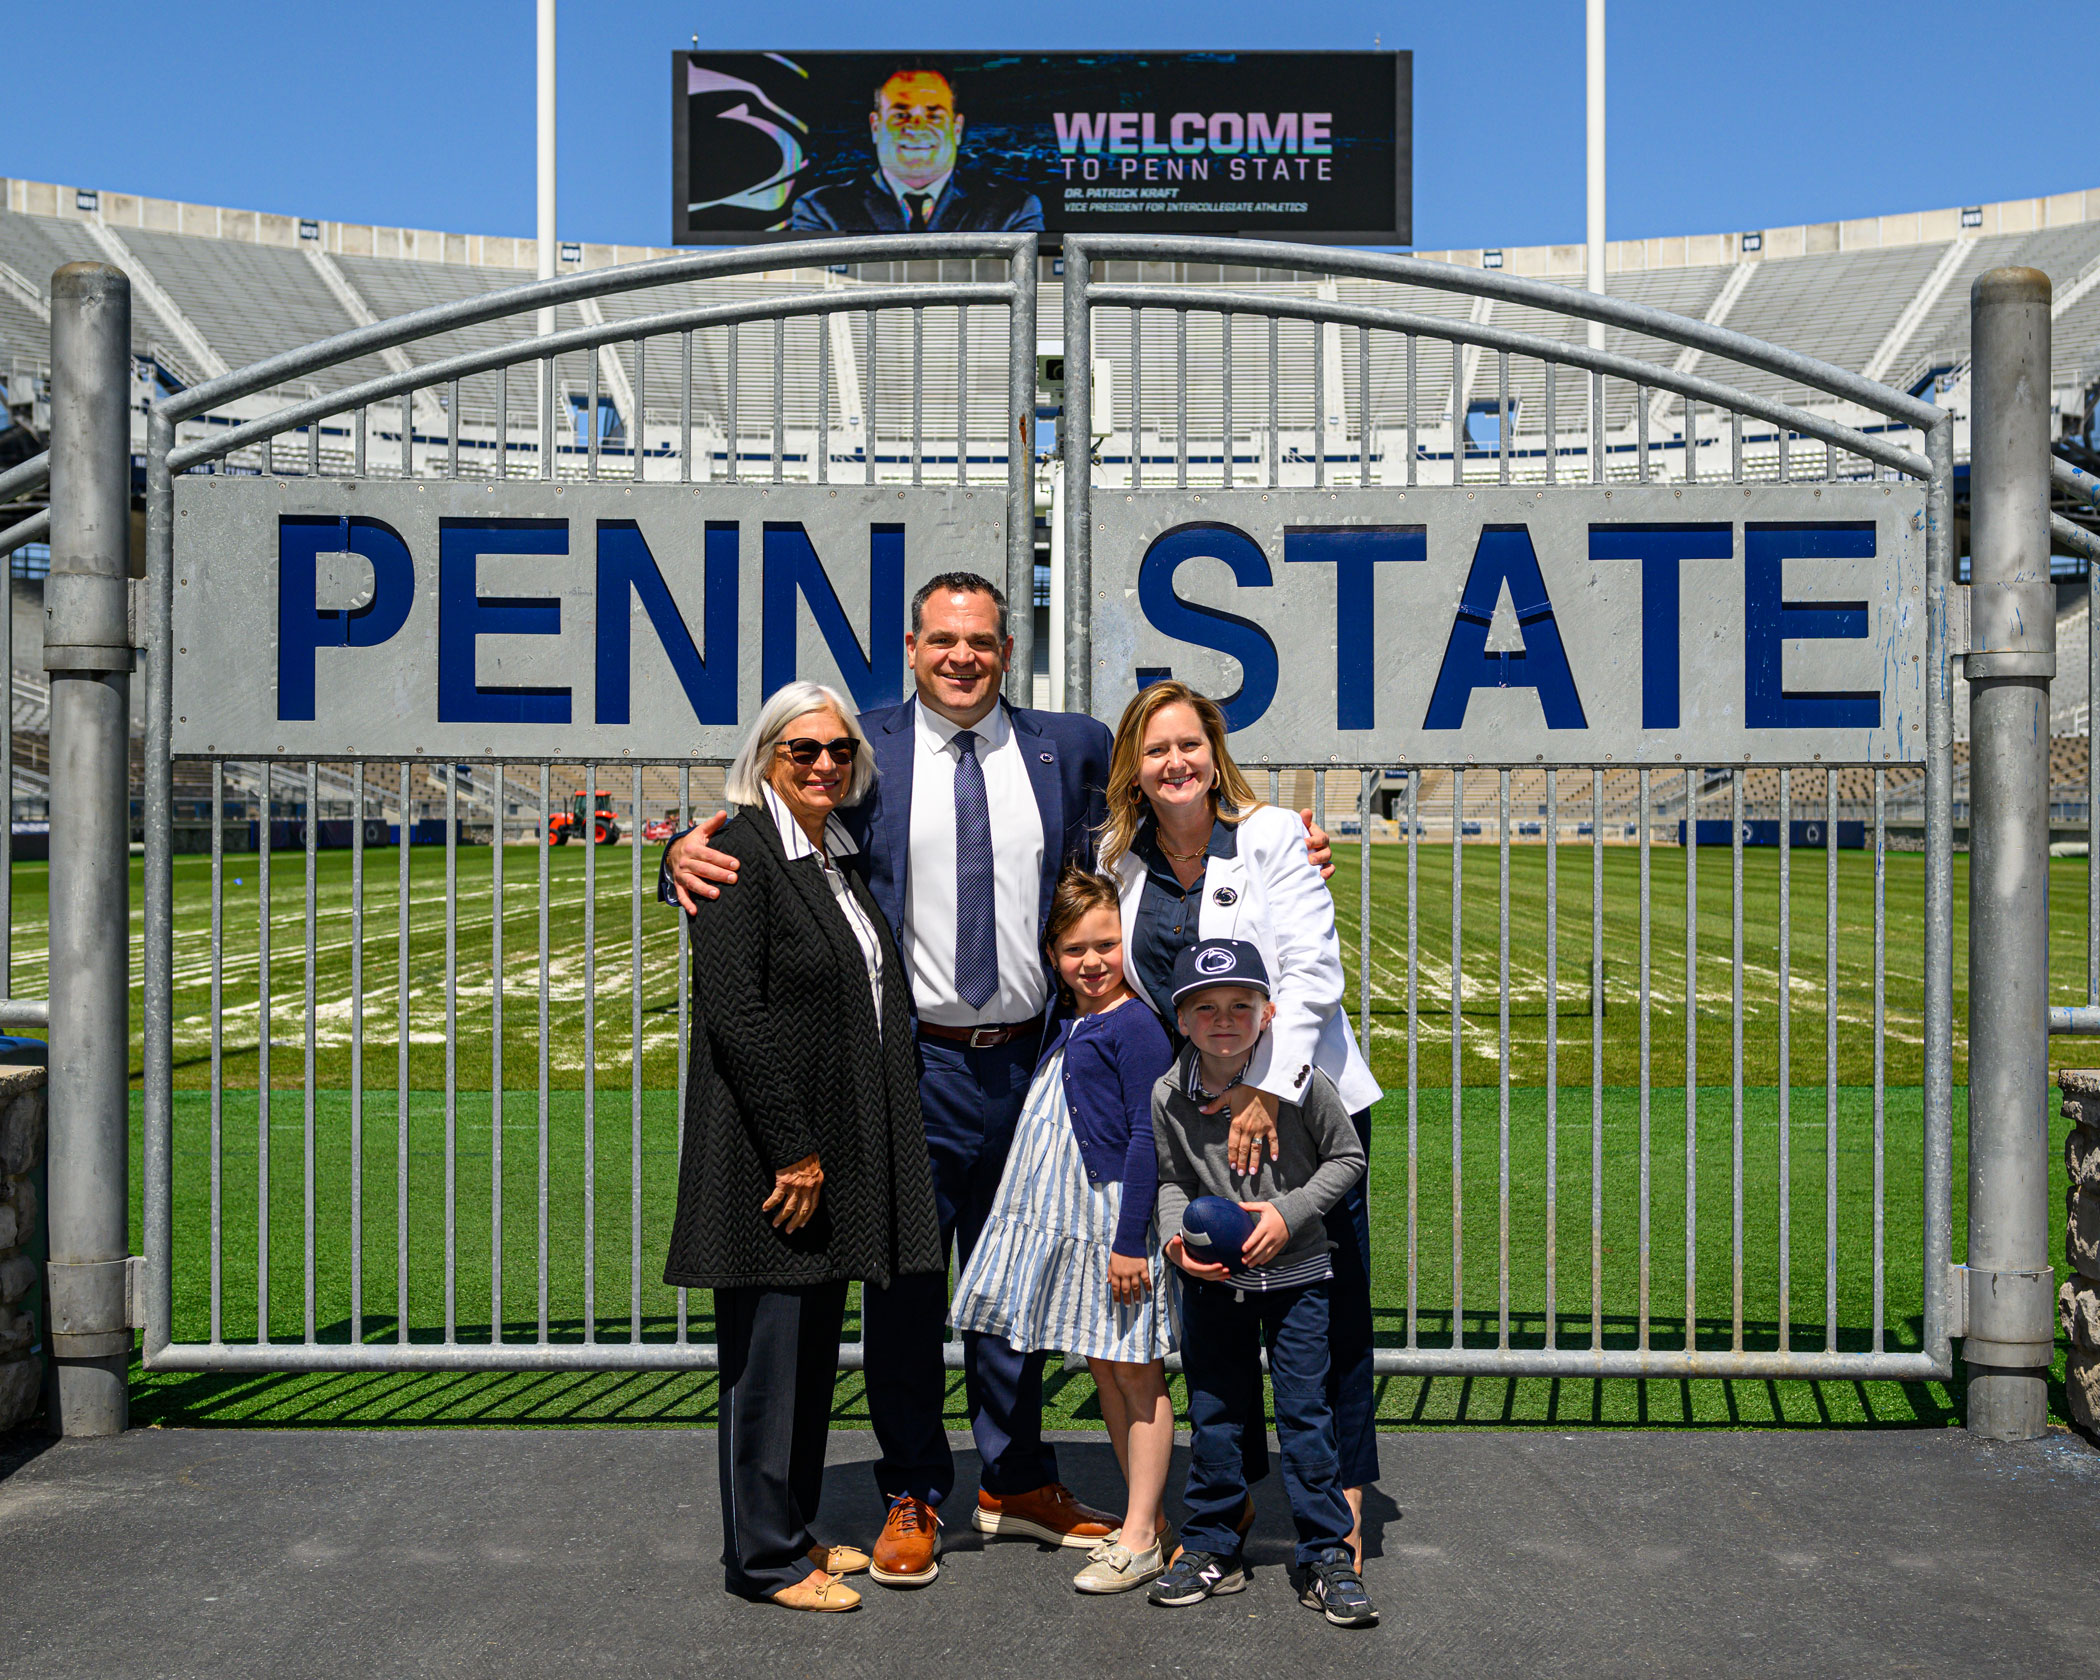 Pat Kraft and family posing in front of Beaver Stadium gate, photo by Mark Selders / Penn State Athletics